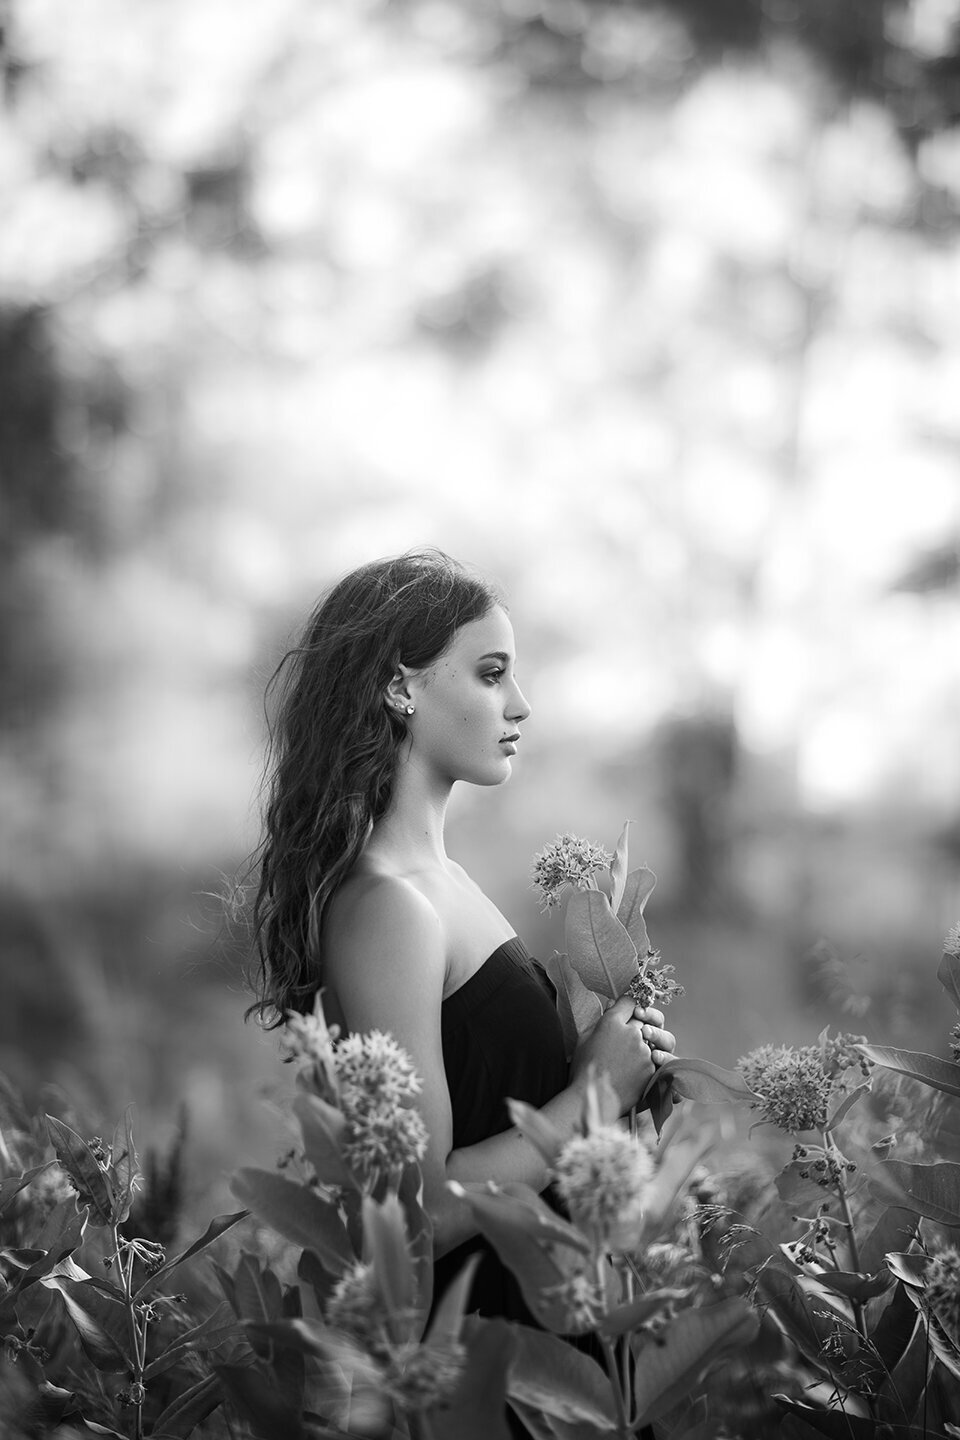 black and white photo of girl in milk weed flowers in billings montana, located at joels pond near sunset.